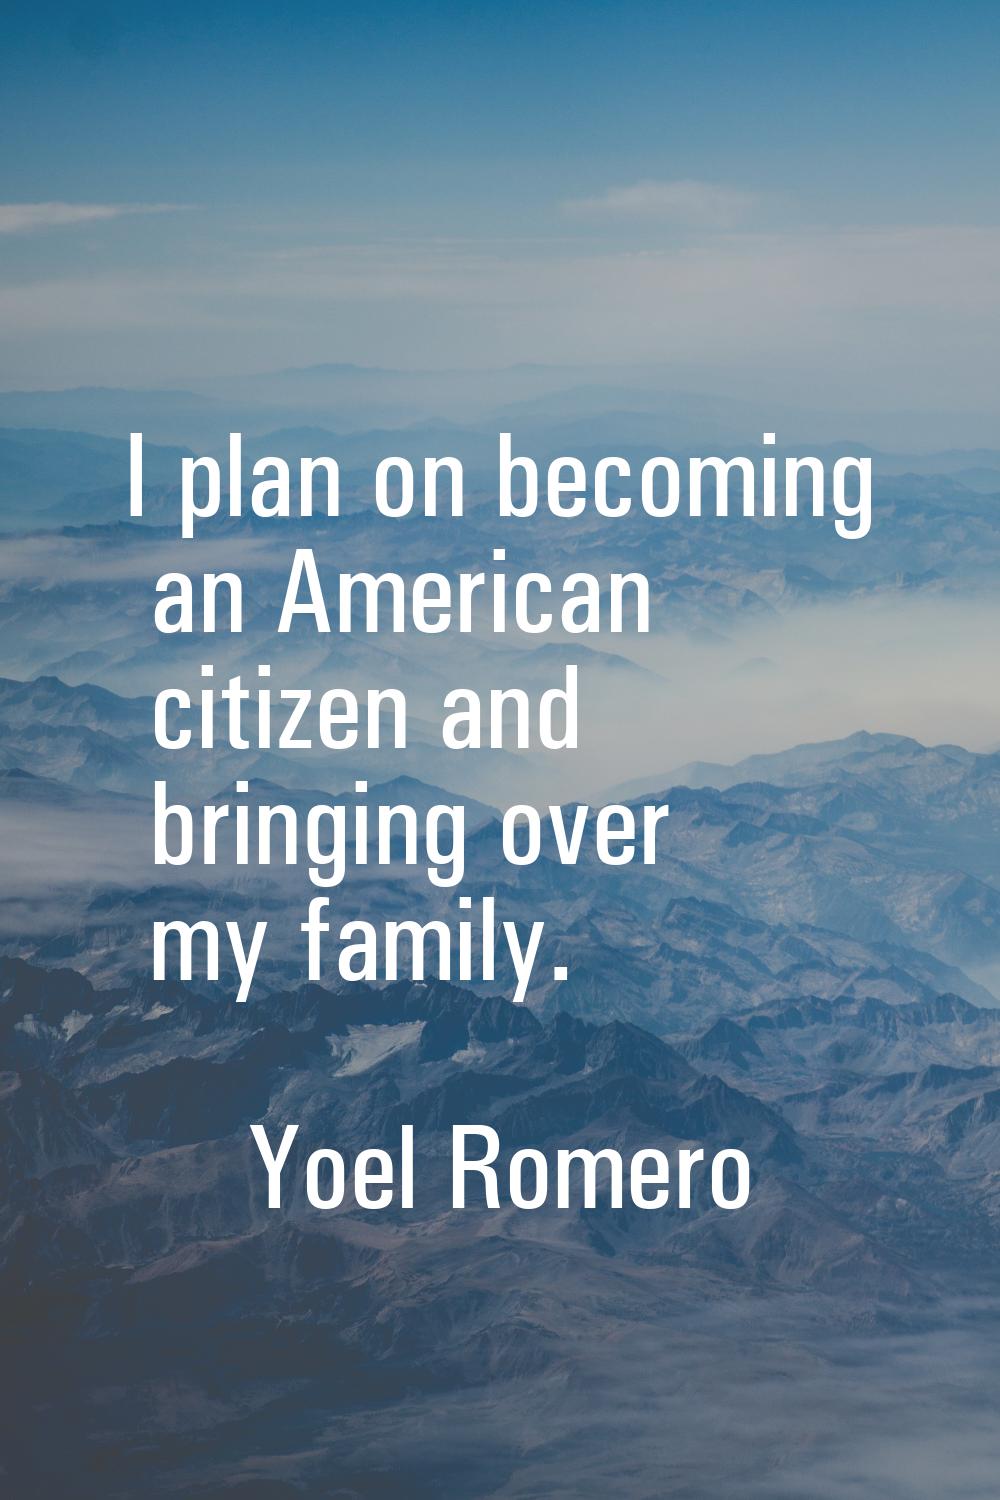 I plan on becoming an American citizen and bringing over my family.